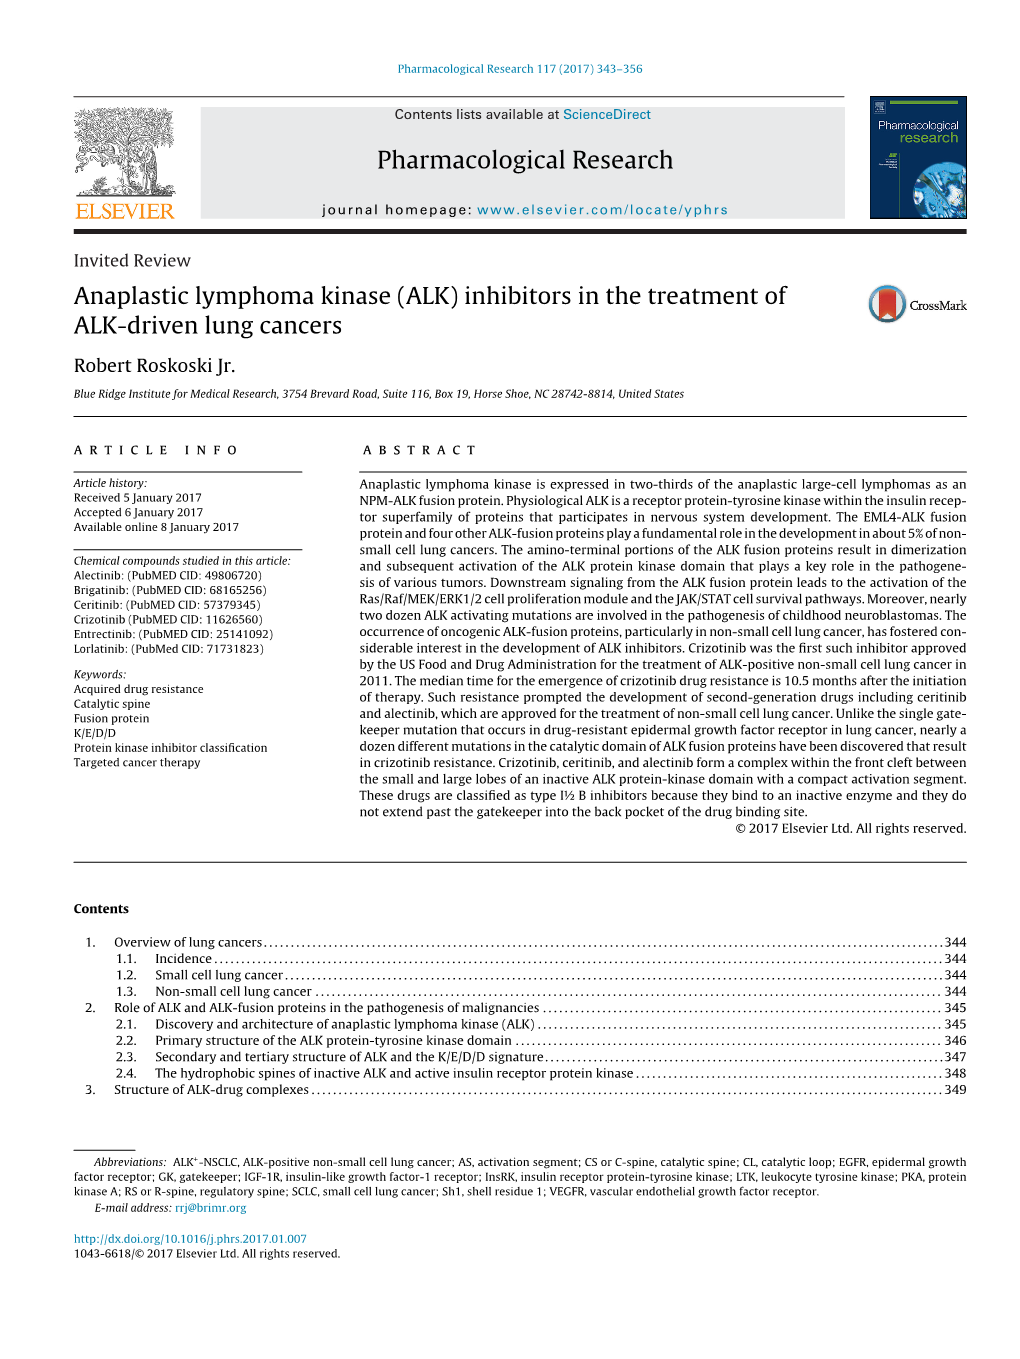 ALK) Inhibitors in the Treatment Of